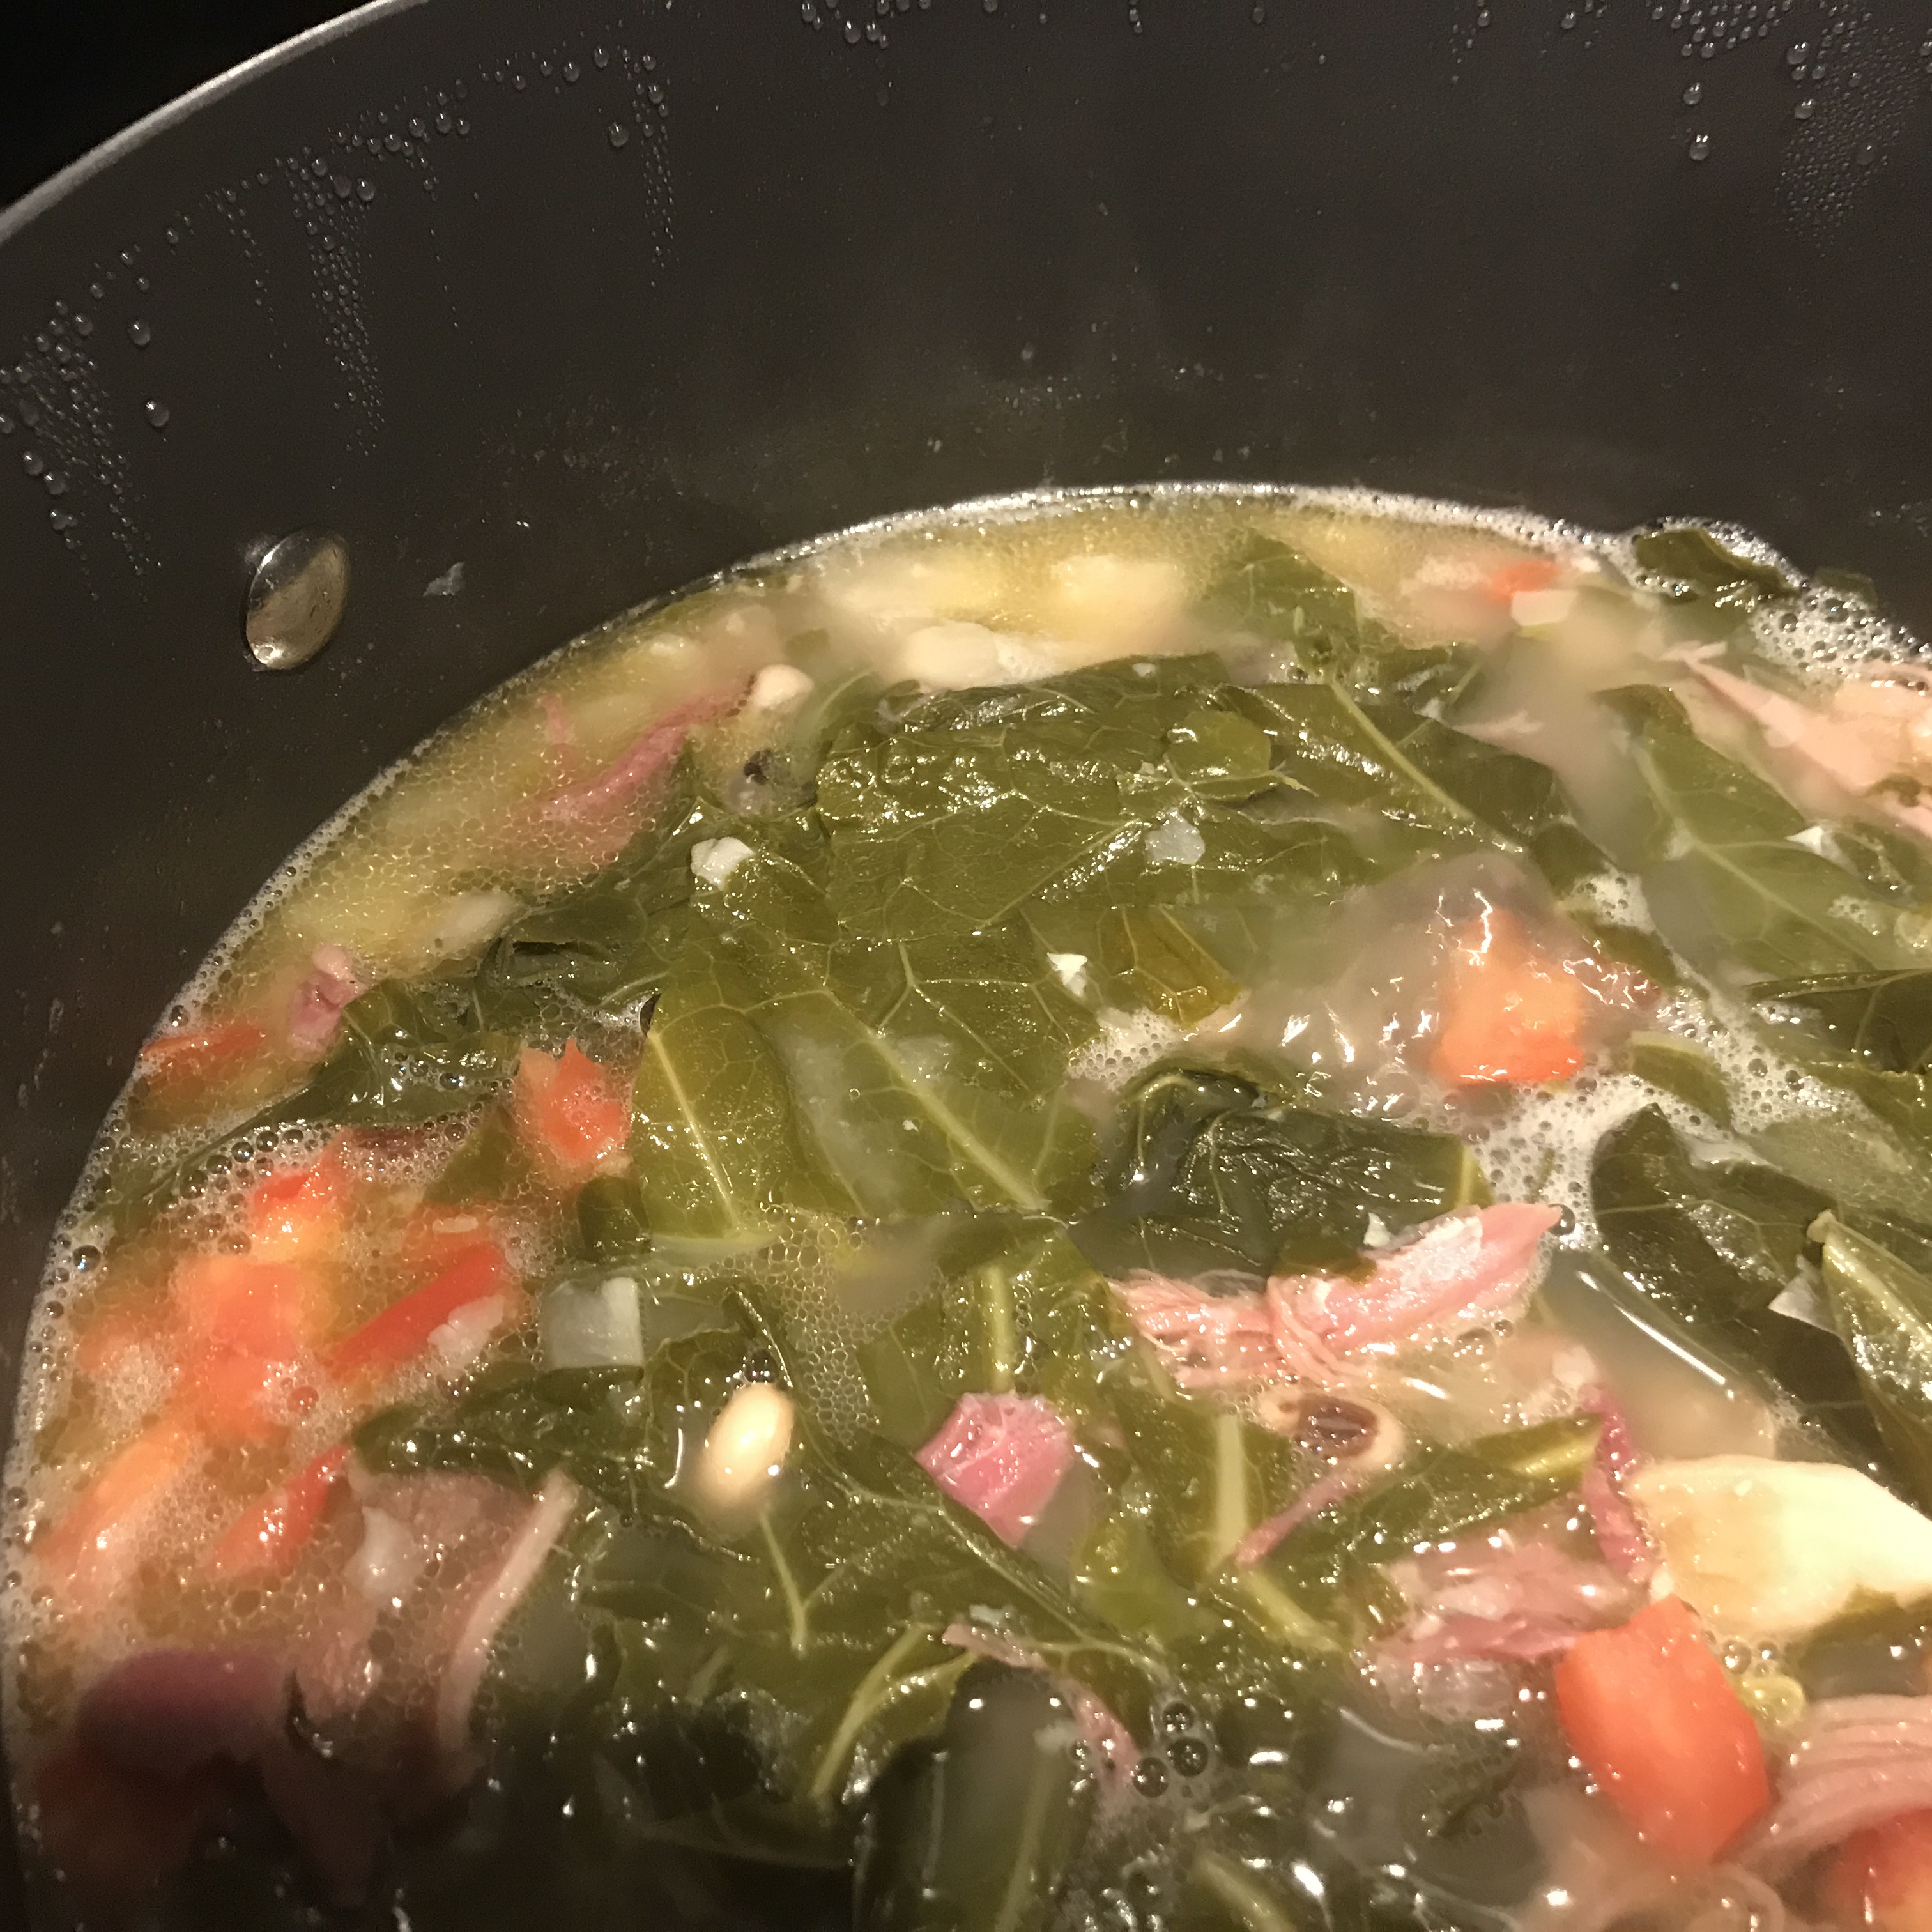 Black-Eyed Peas With Collard Greens and Turnips Dianne